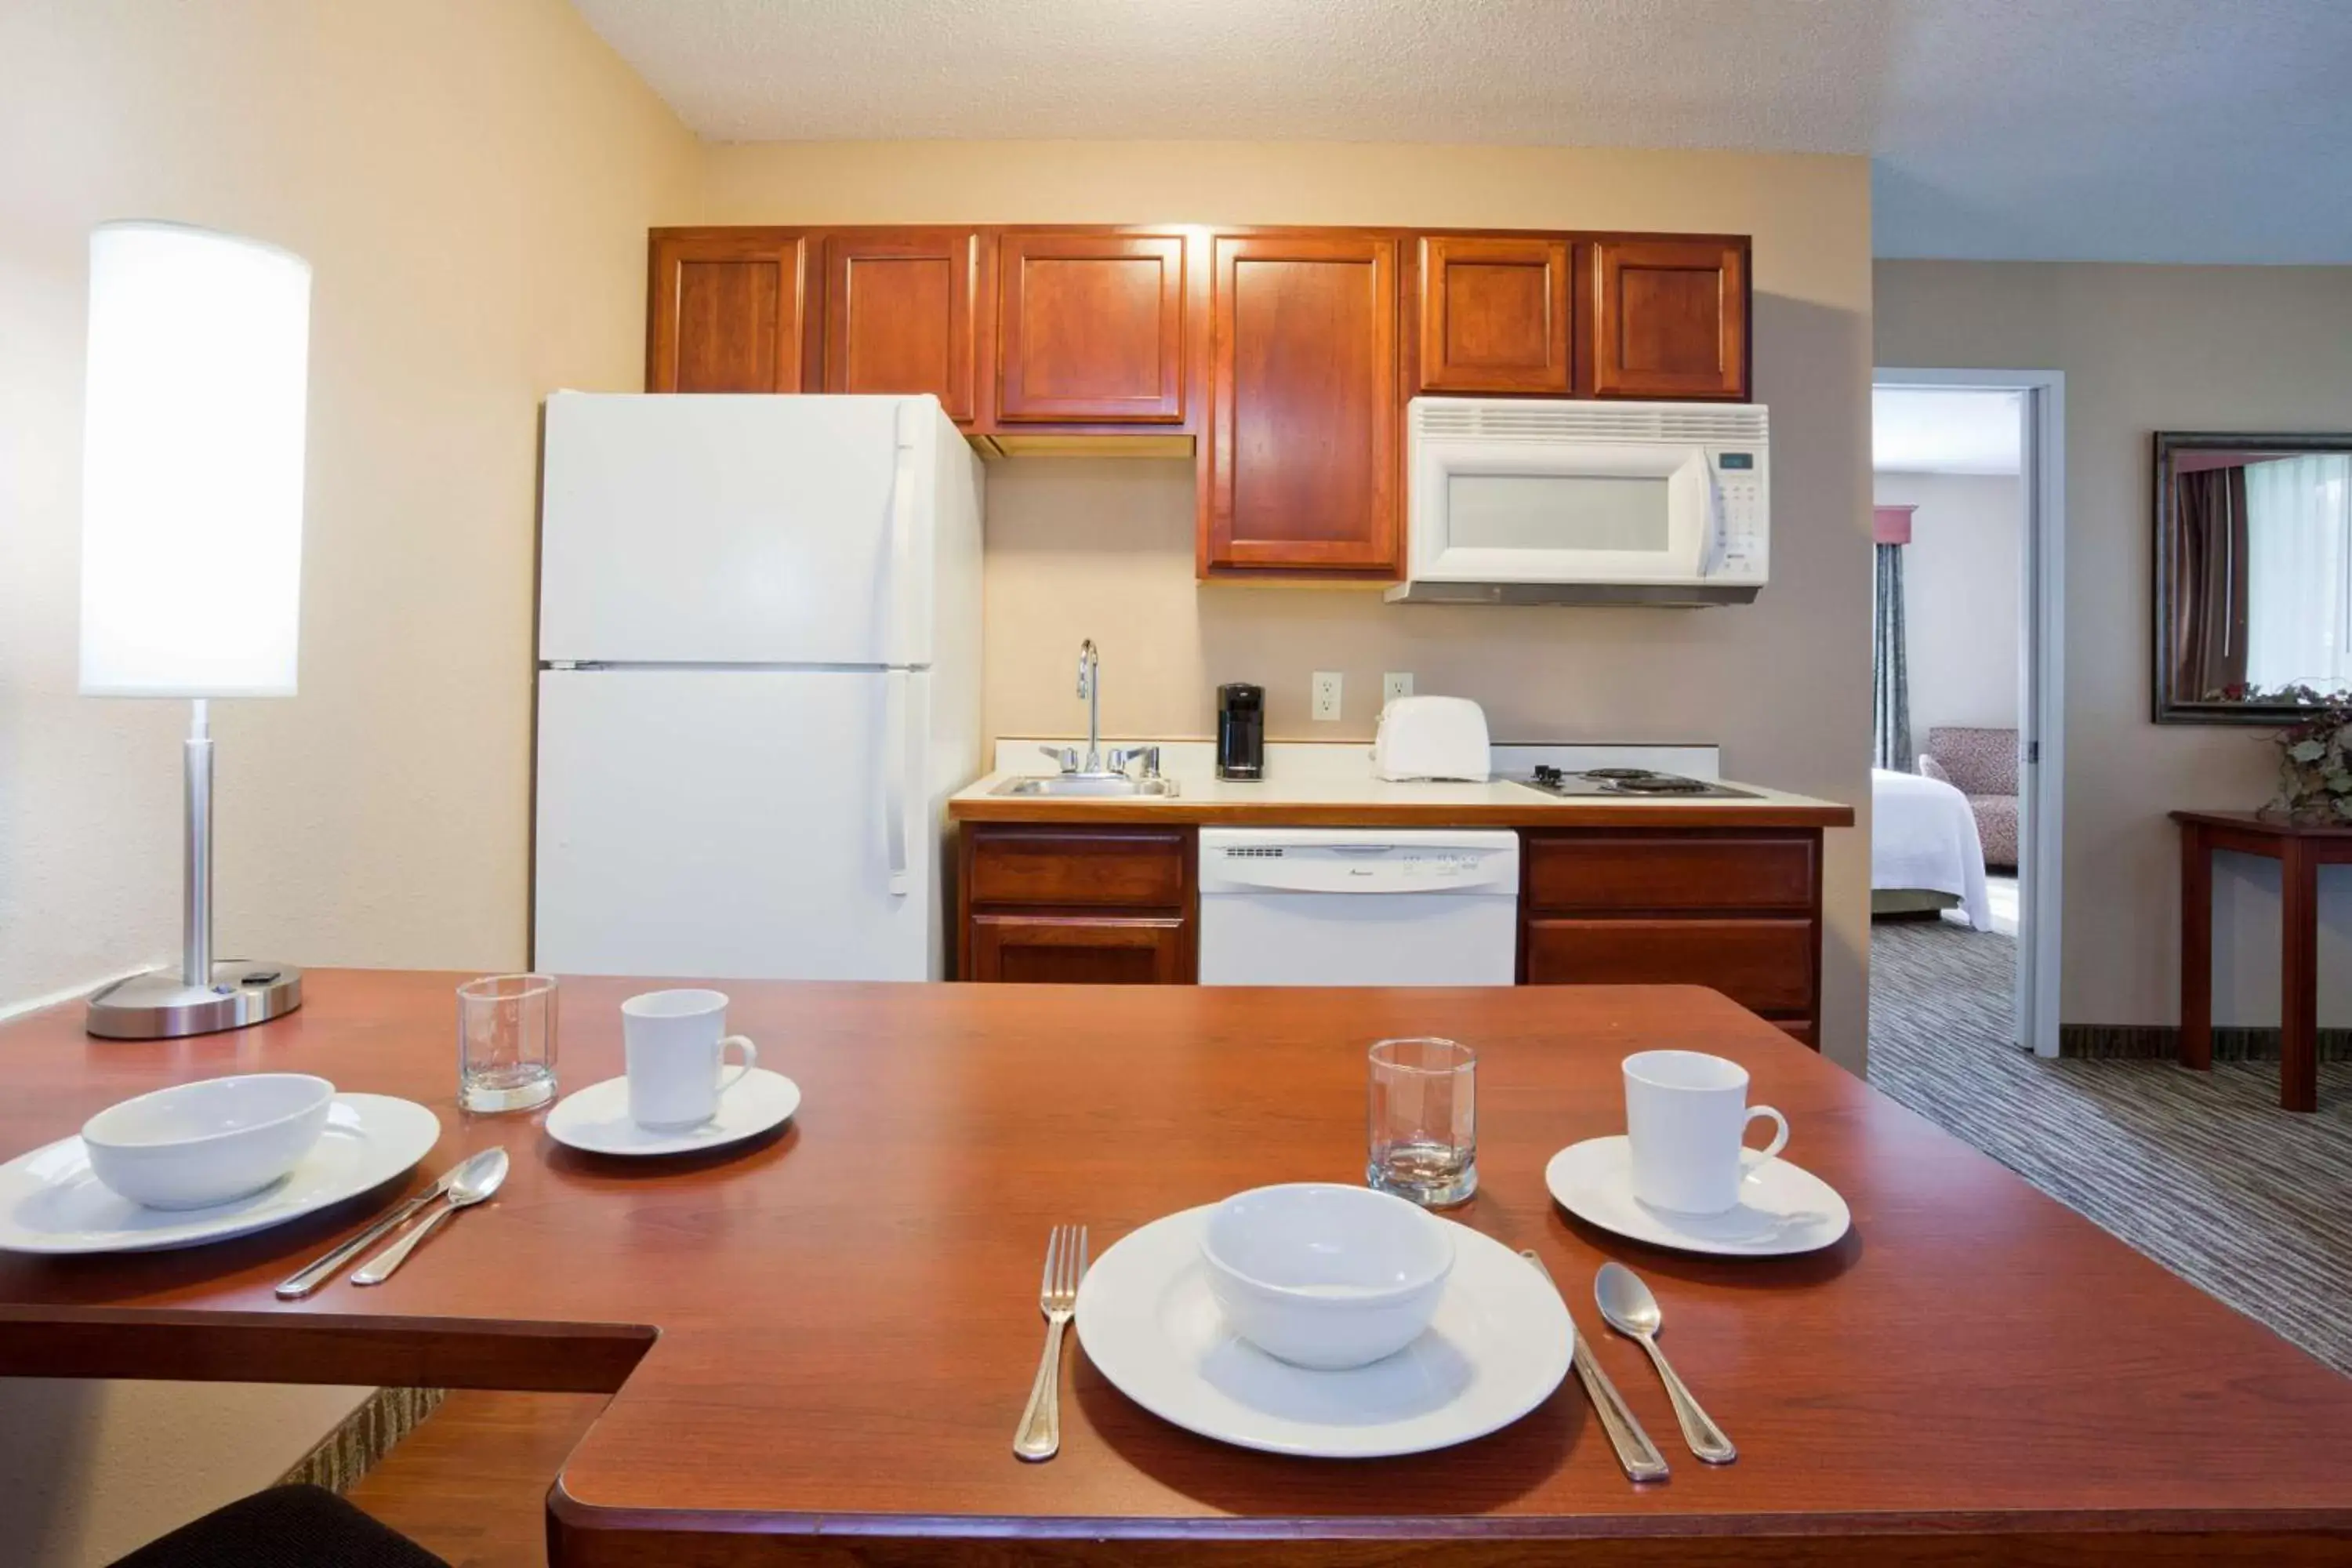 Kitchen/Kitchenette in GrandStay Residential Suites Hotel - Eau Claire